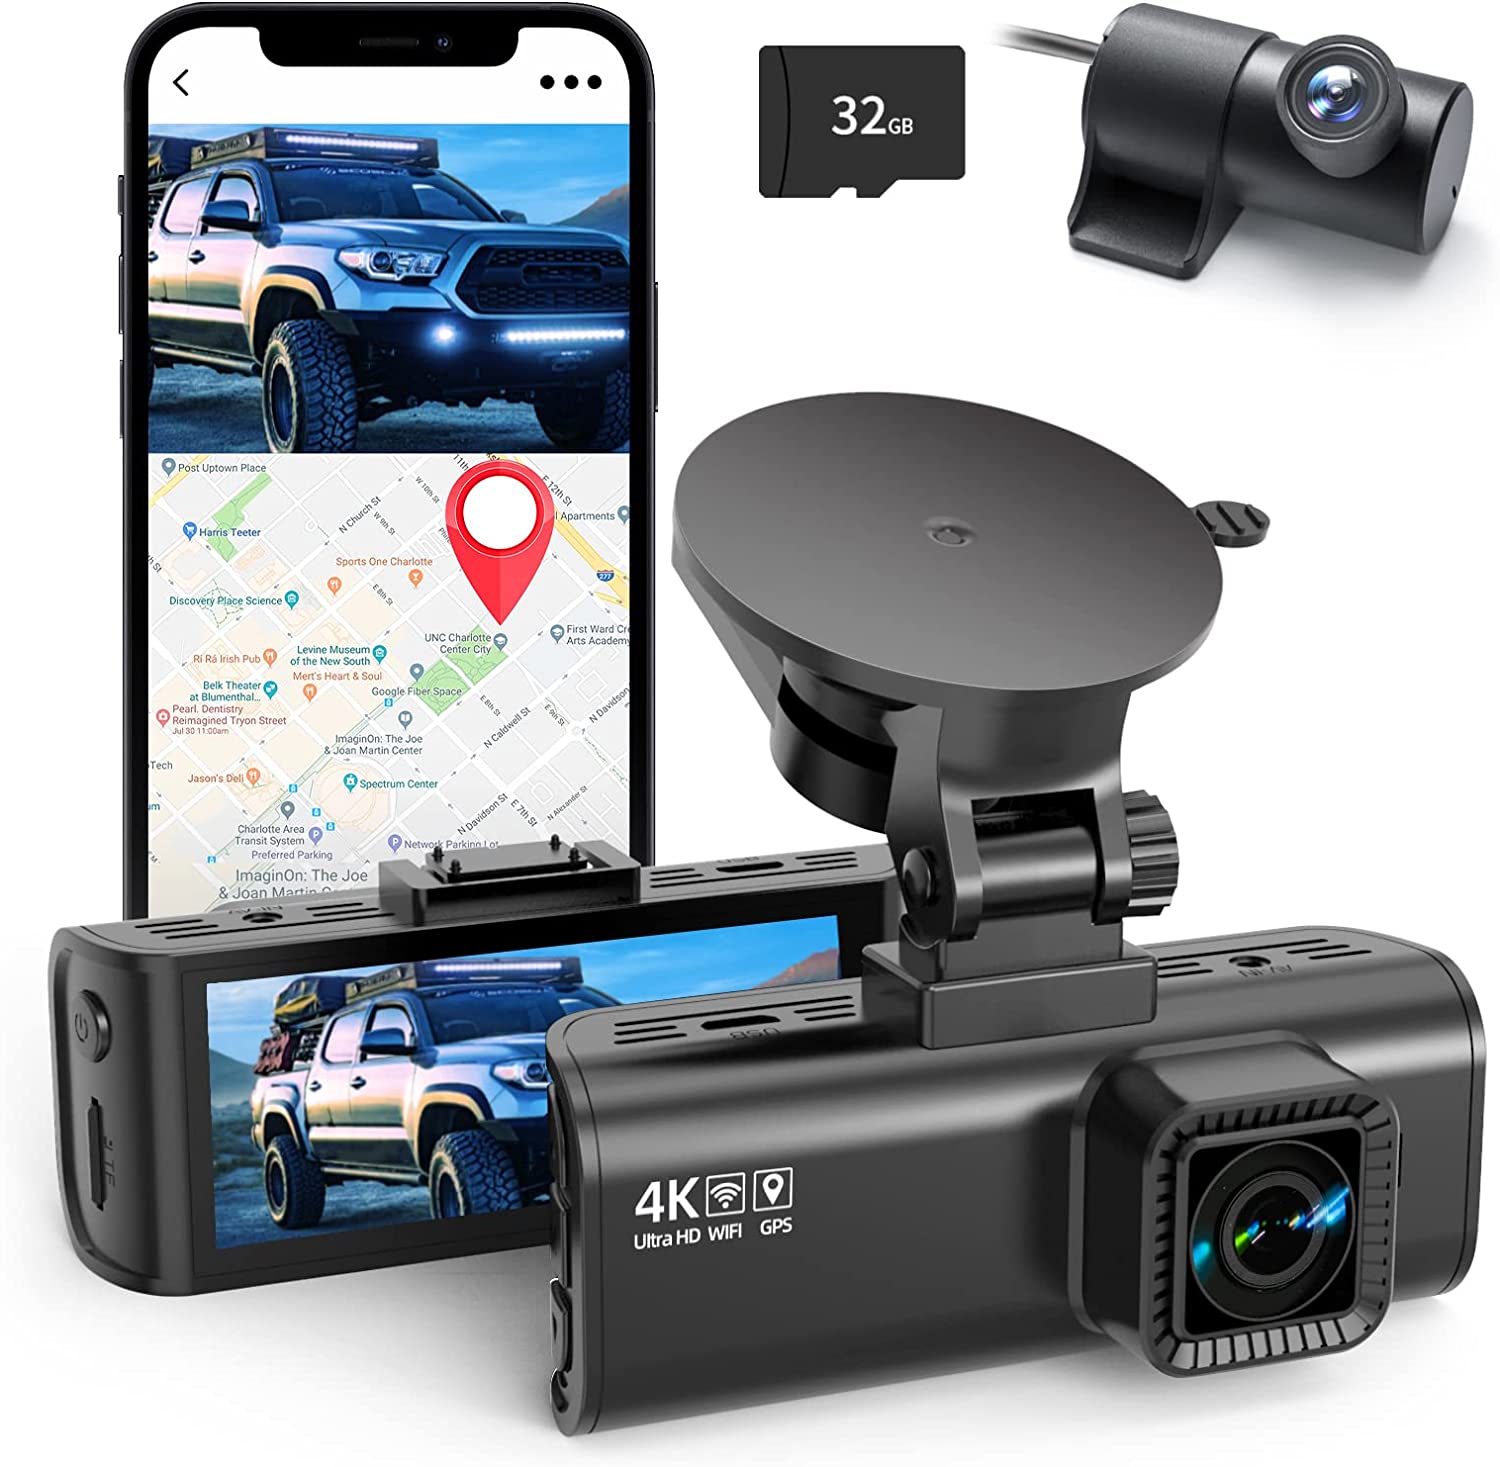 REDTIGER Dash Cam Front and Rear, 4K Dash Cam with WiFi & GPS, 4K